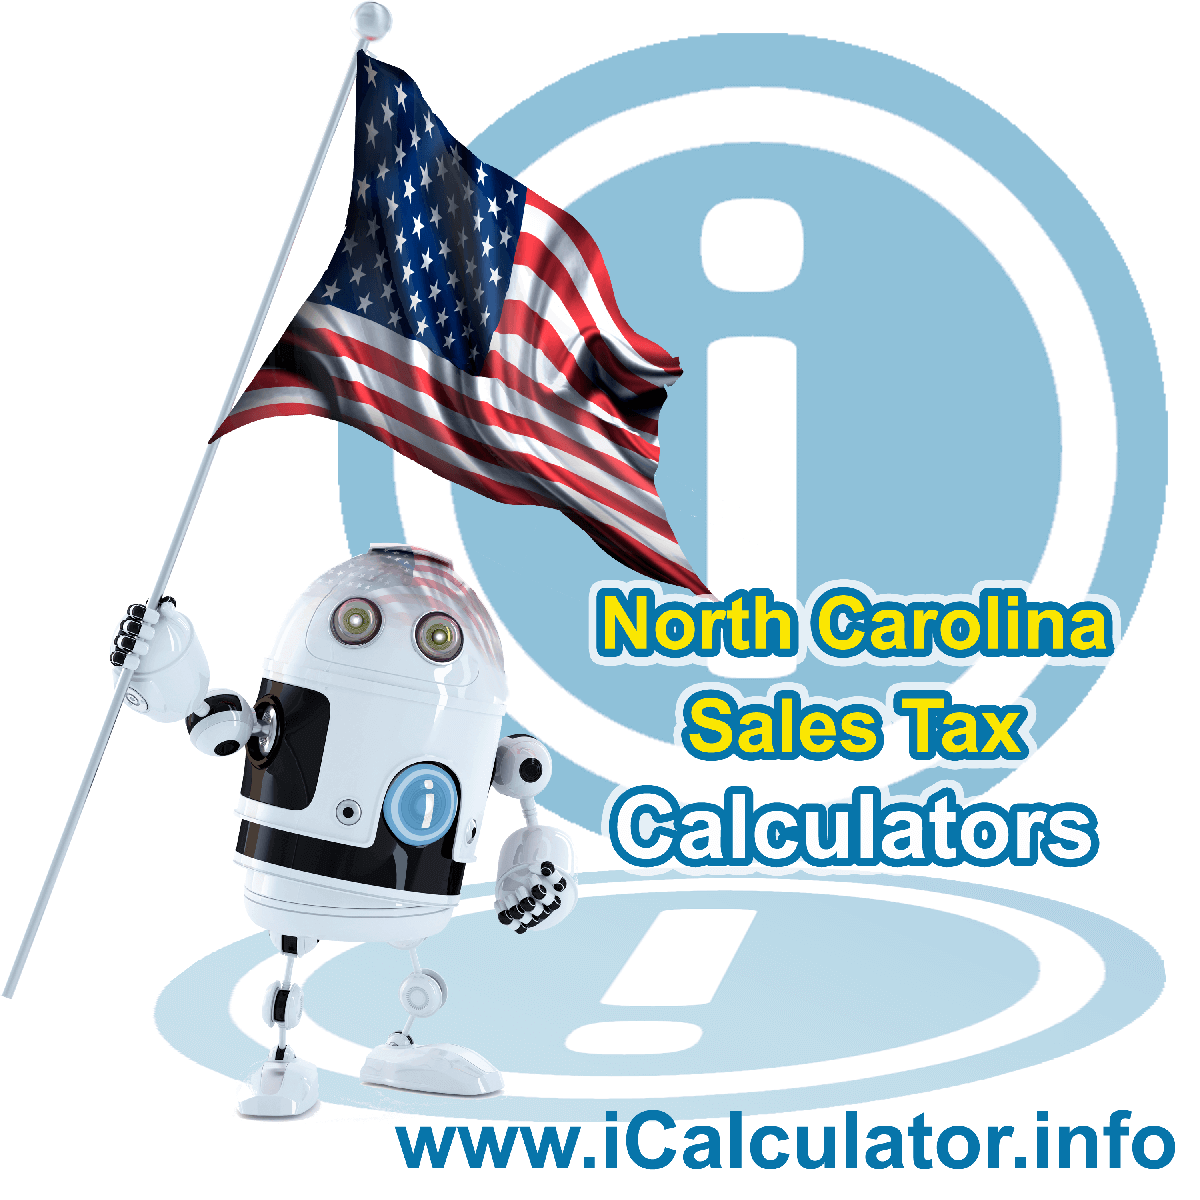 Greene County Sales Rates: This image illustrates a calculator robot calculating Greene County sales tax manually using the Greene County Sales Tax Formula. You can use this information to calculate Greene County Sales Tax manually or use the Greene County Sales Tax Calculator to calculate sales tax online.